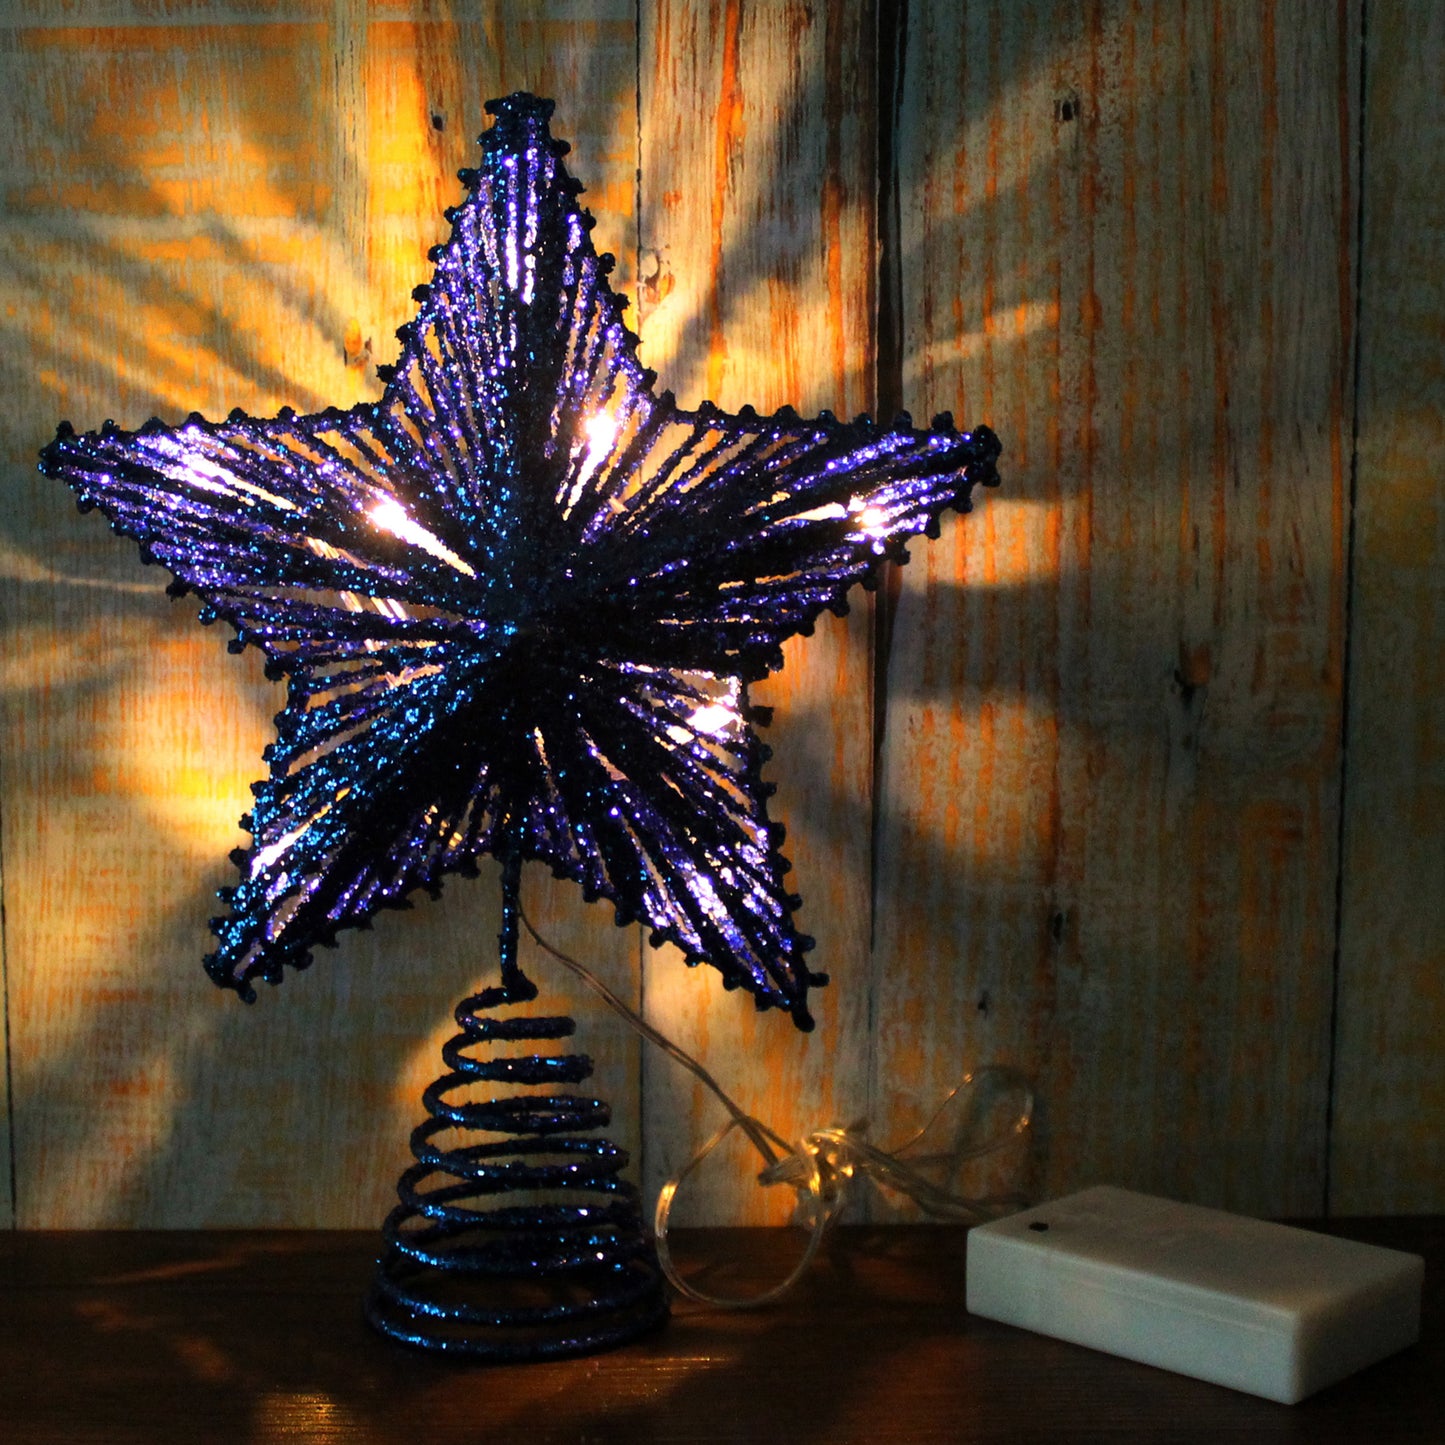 CVHOMEDECO. Blue Glittered 3D Tree Top Star with Warm White LED Lights and timer for Christmas Ornaments and Holiday Seasonal Décor, 8 x 10 Inch